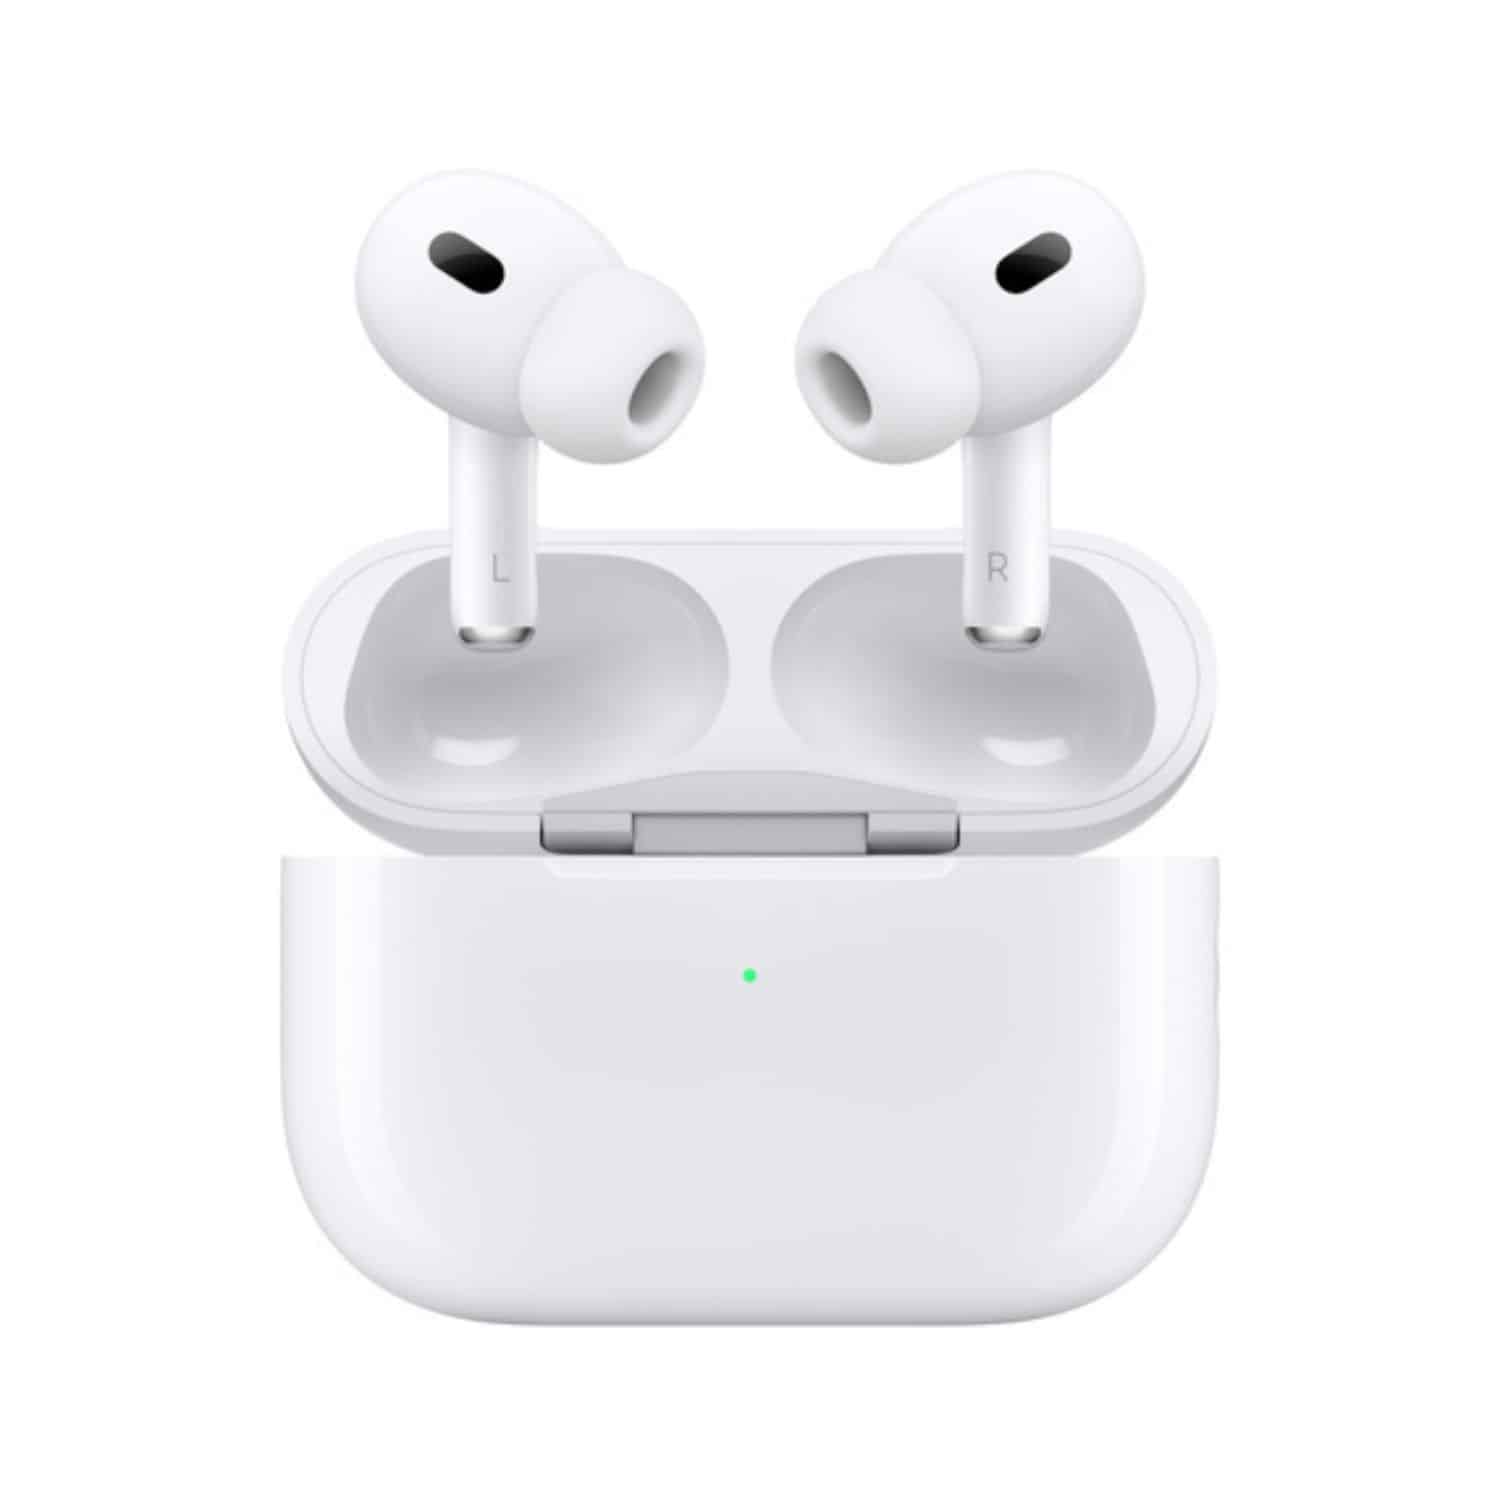 Apple AirPods Pros 2nd Generation with Charging Case 